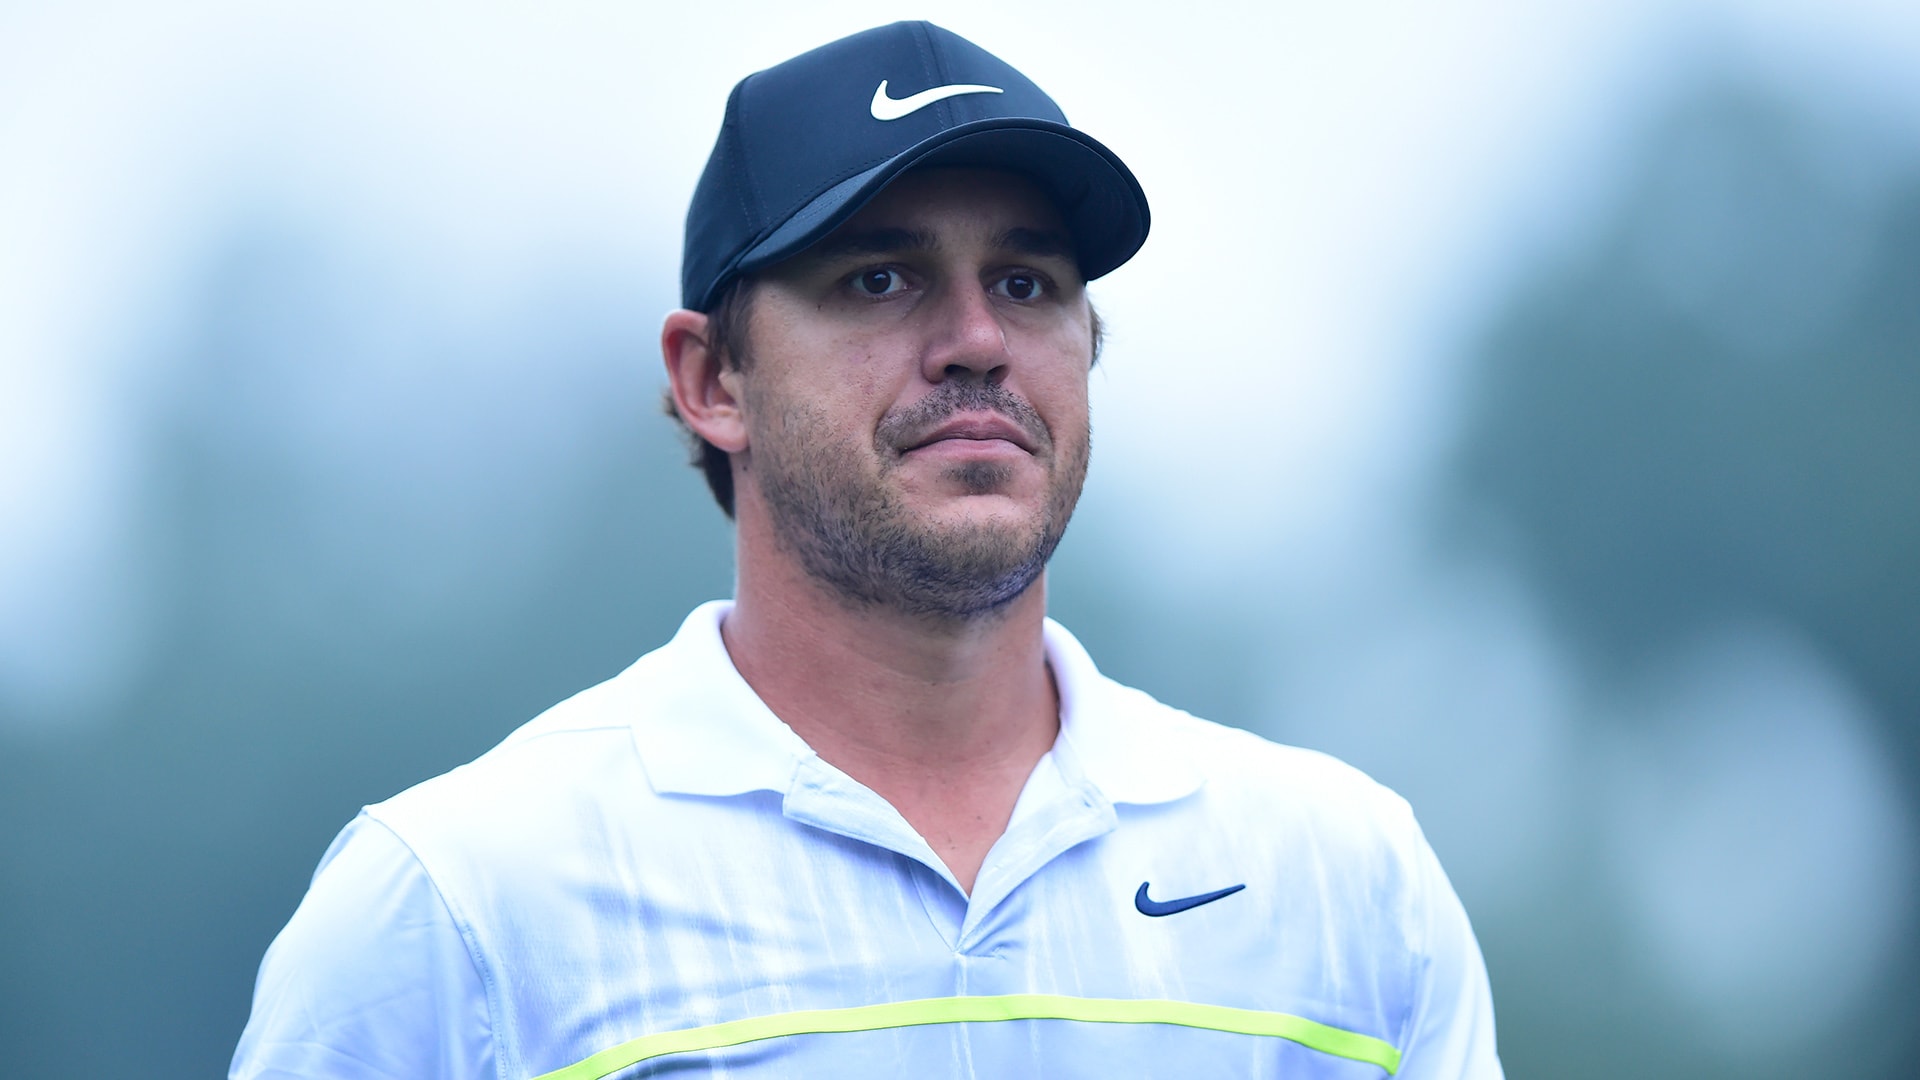 Playing His Sixth Event in a Row, Brooks Koepka ‘Flat’ During Opening 72